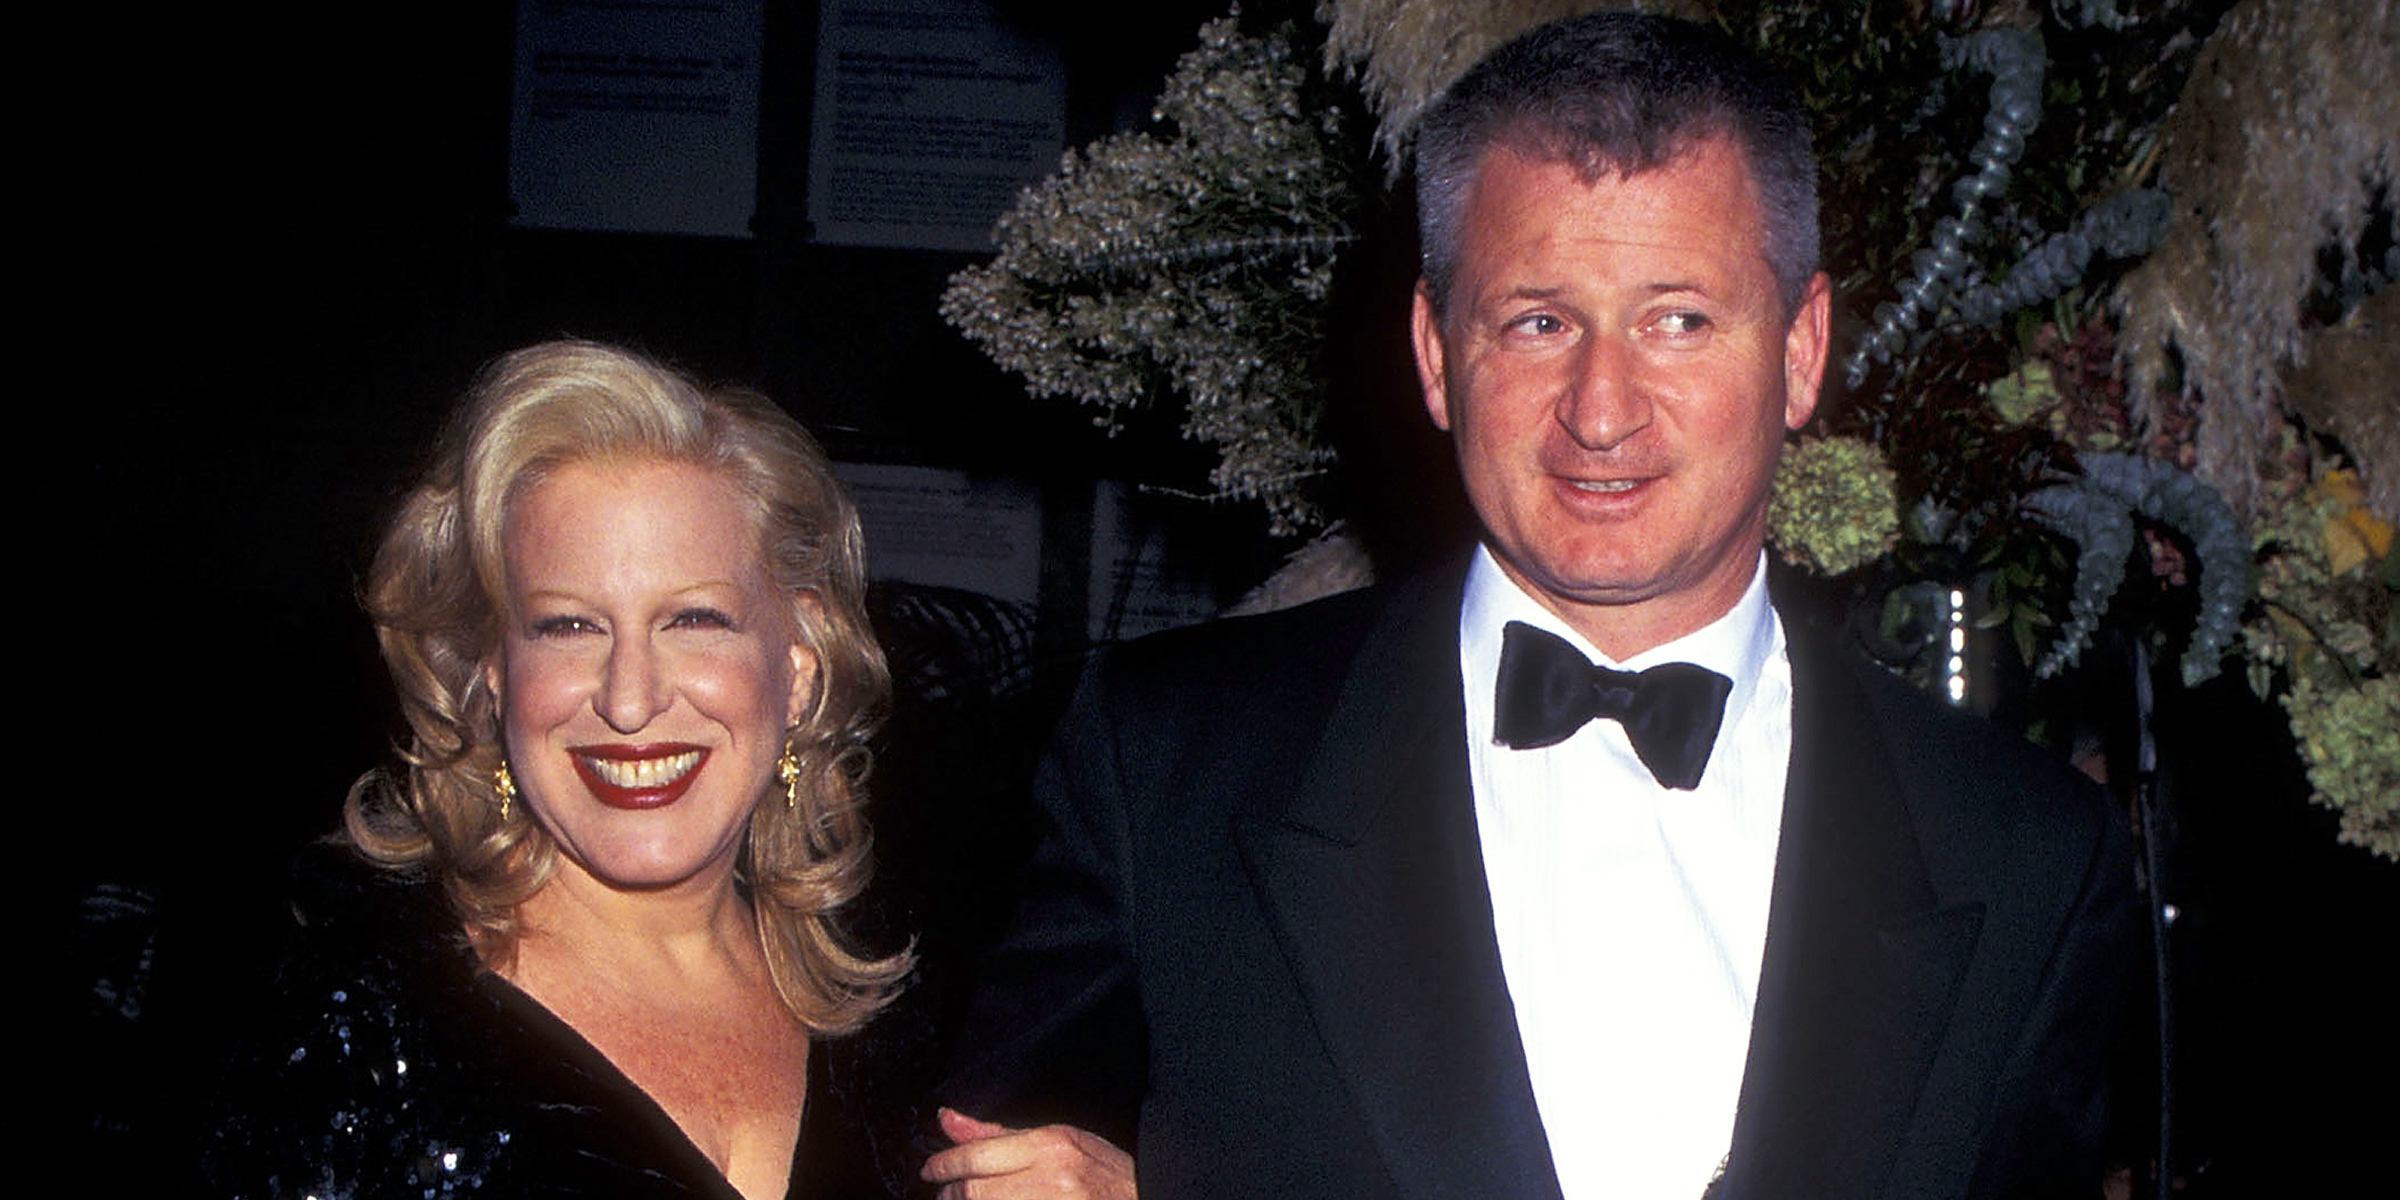 Bette Midler and her husband Martin von Haselberg | Source: Getty Images